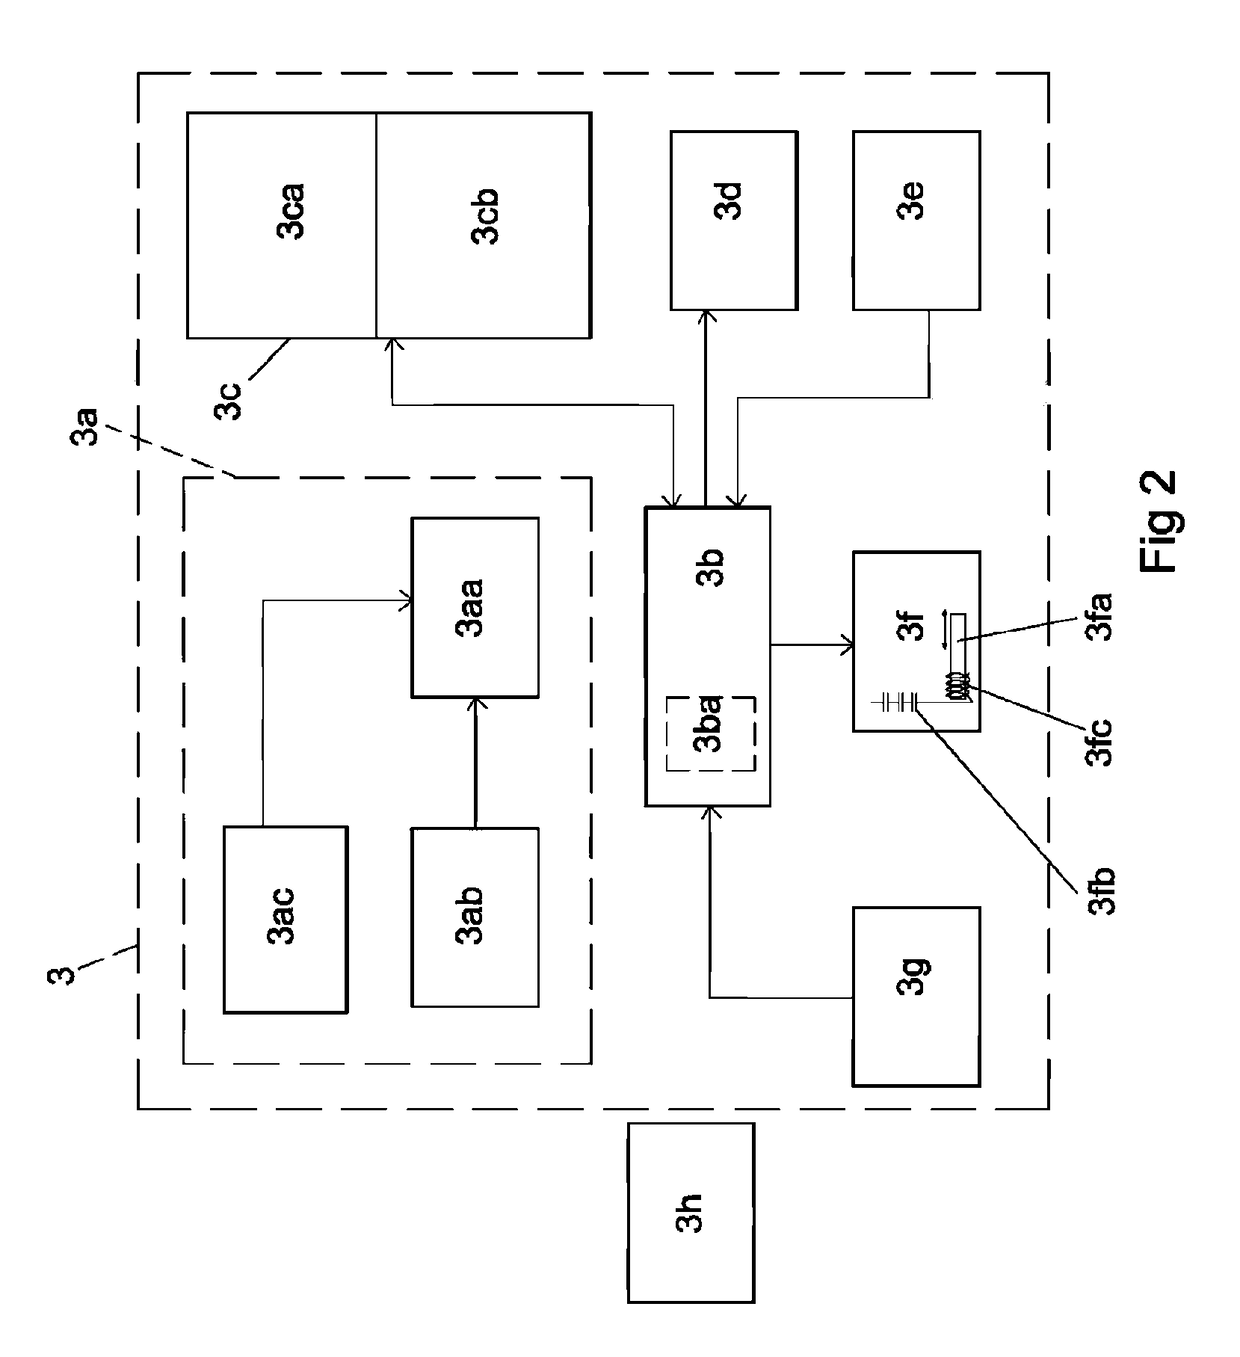 System and method for controlling and managing shopping trolleys